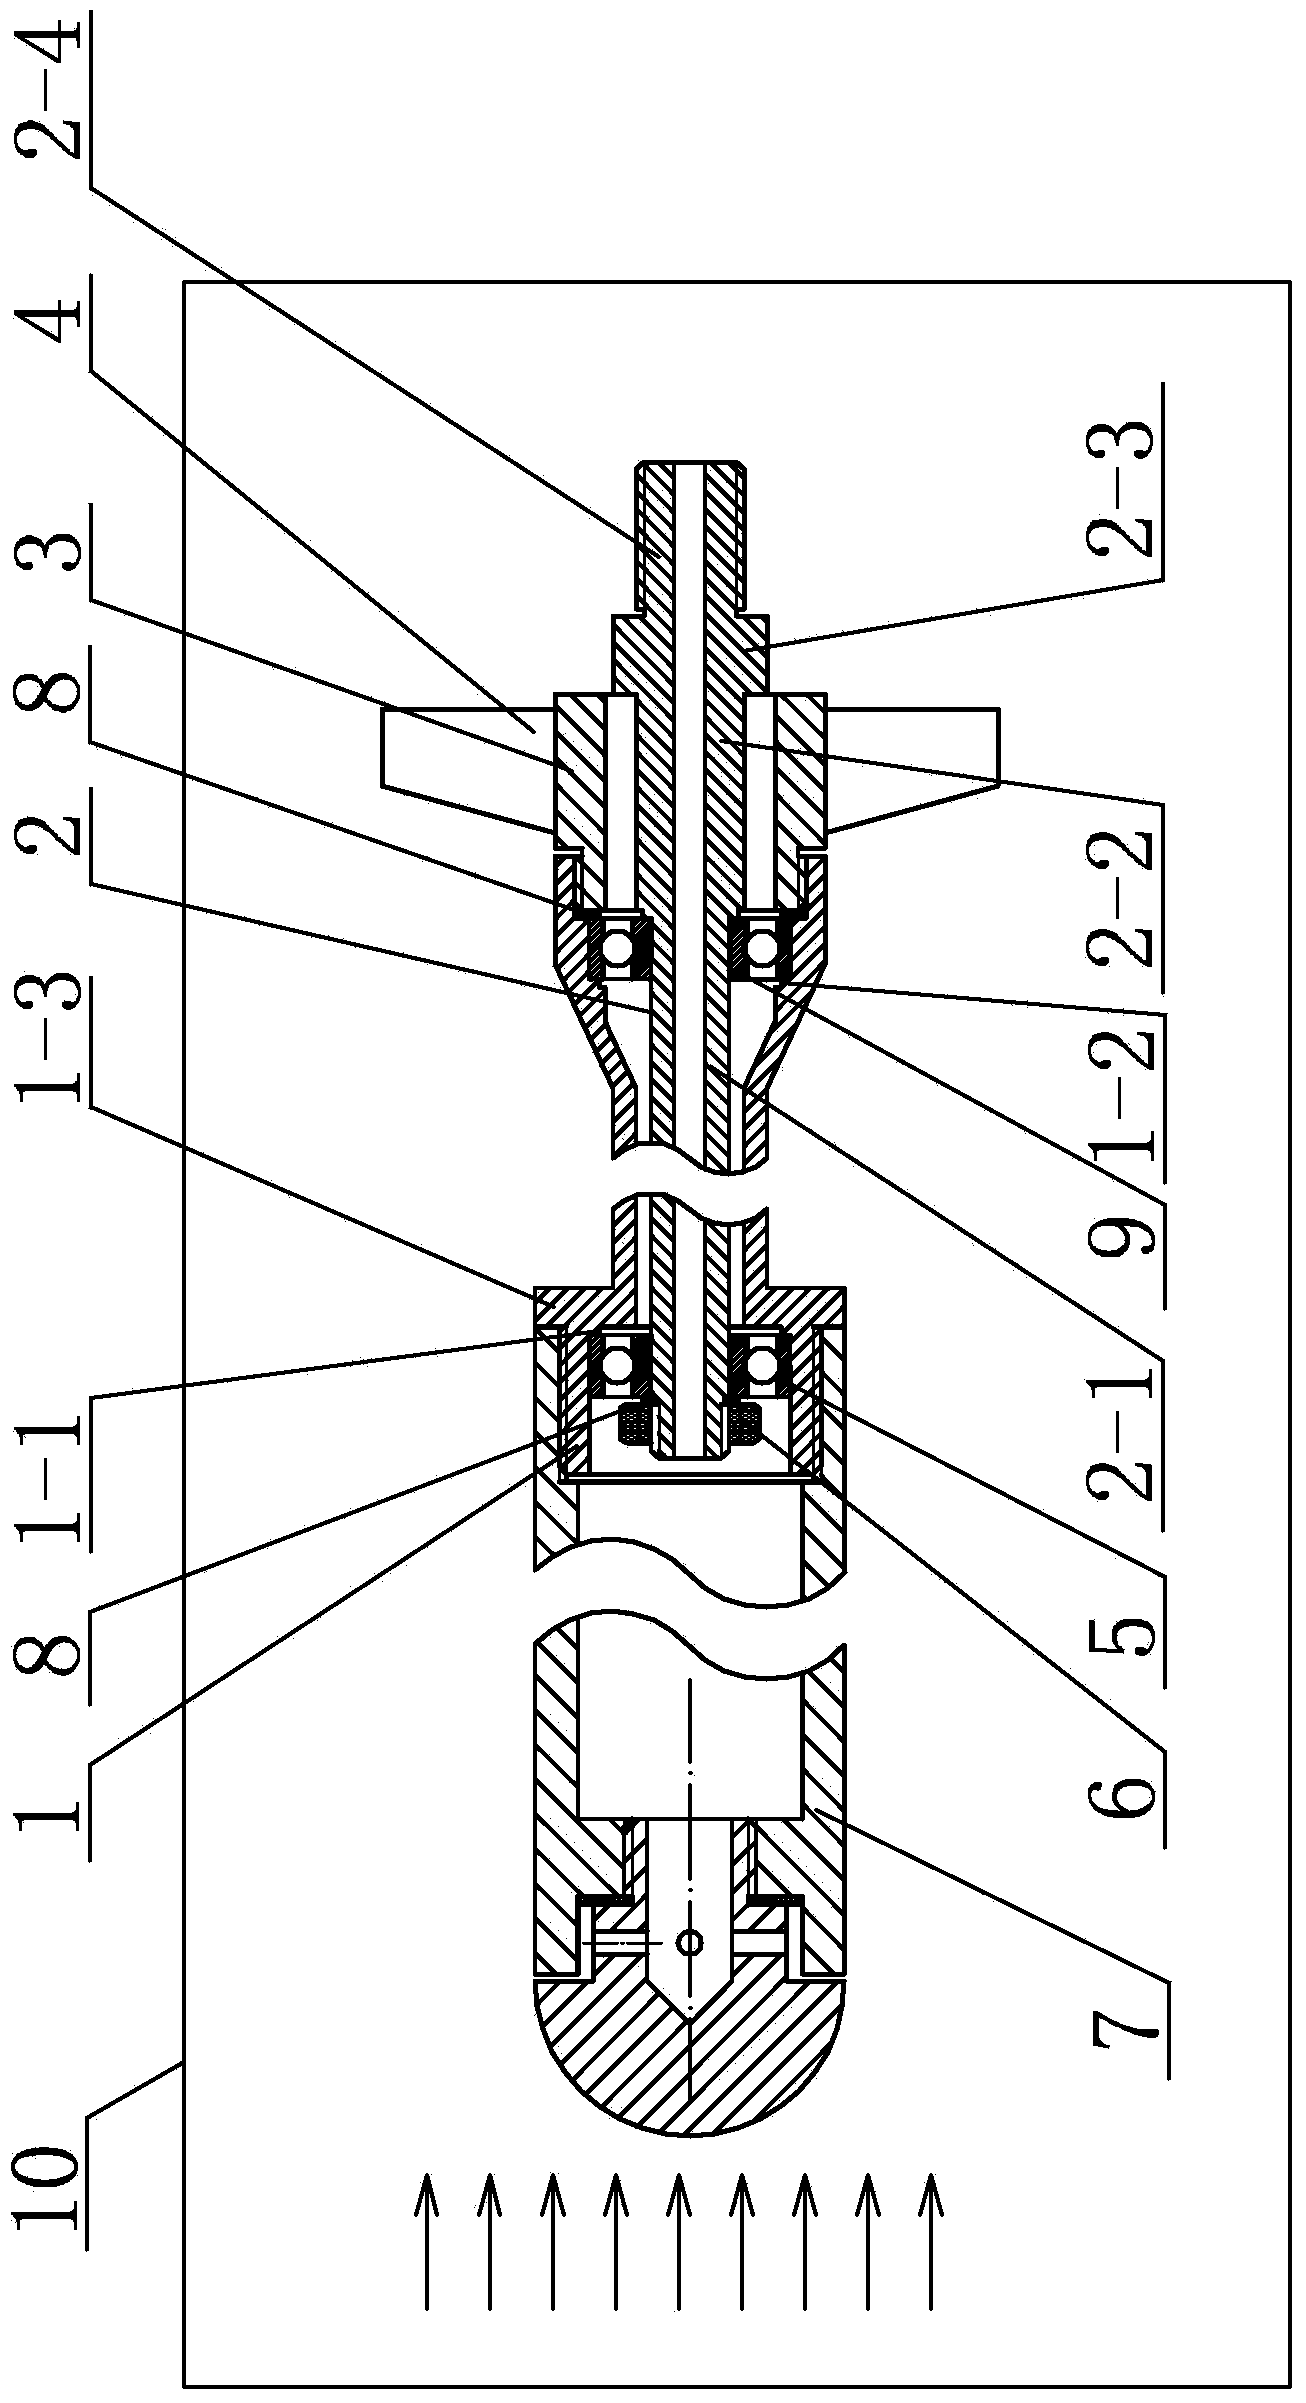 Ventilation navigation body self-rotation device used in water tunnel experiment